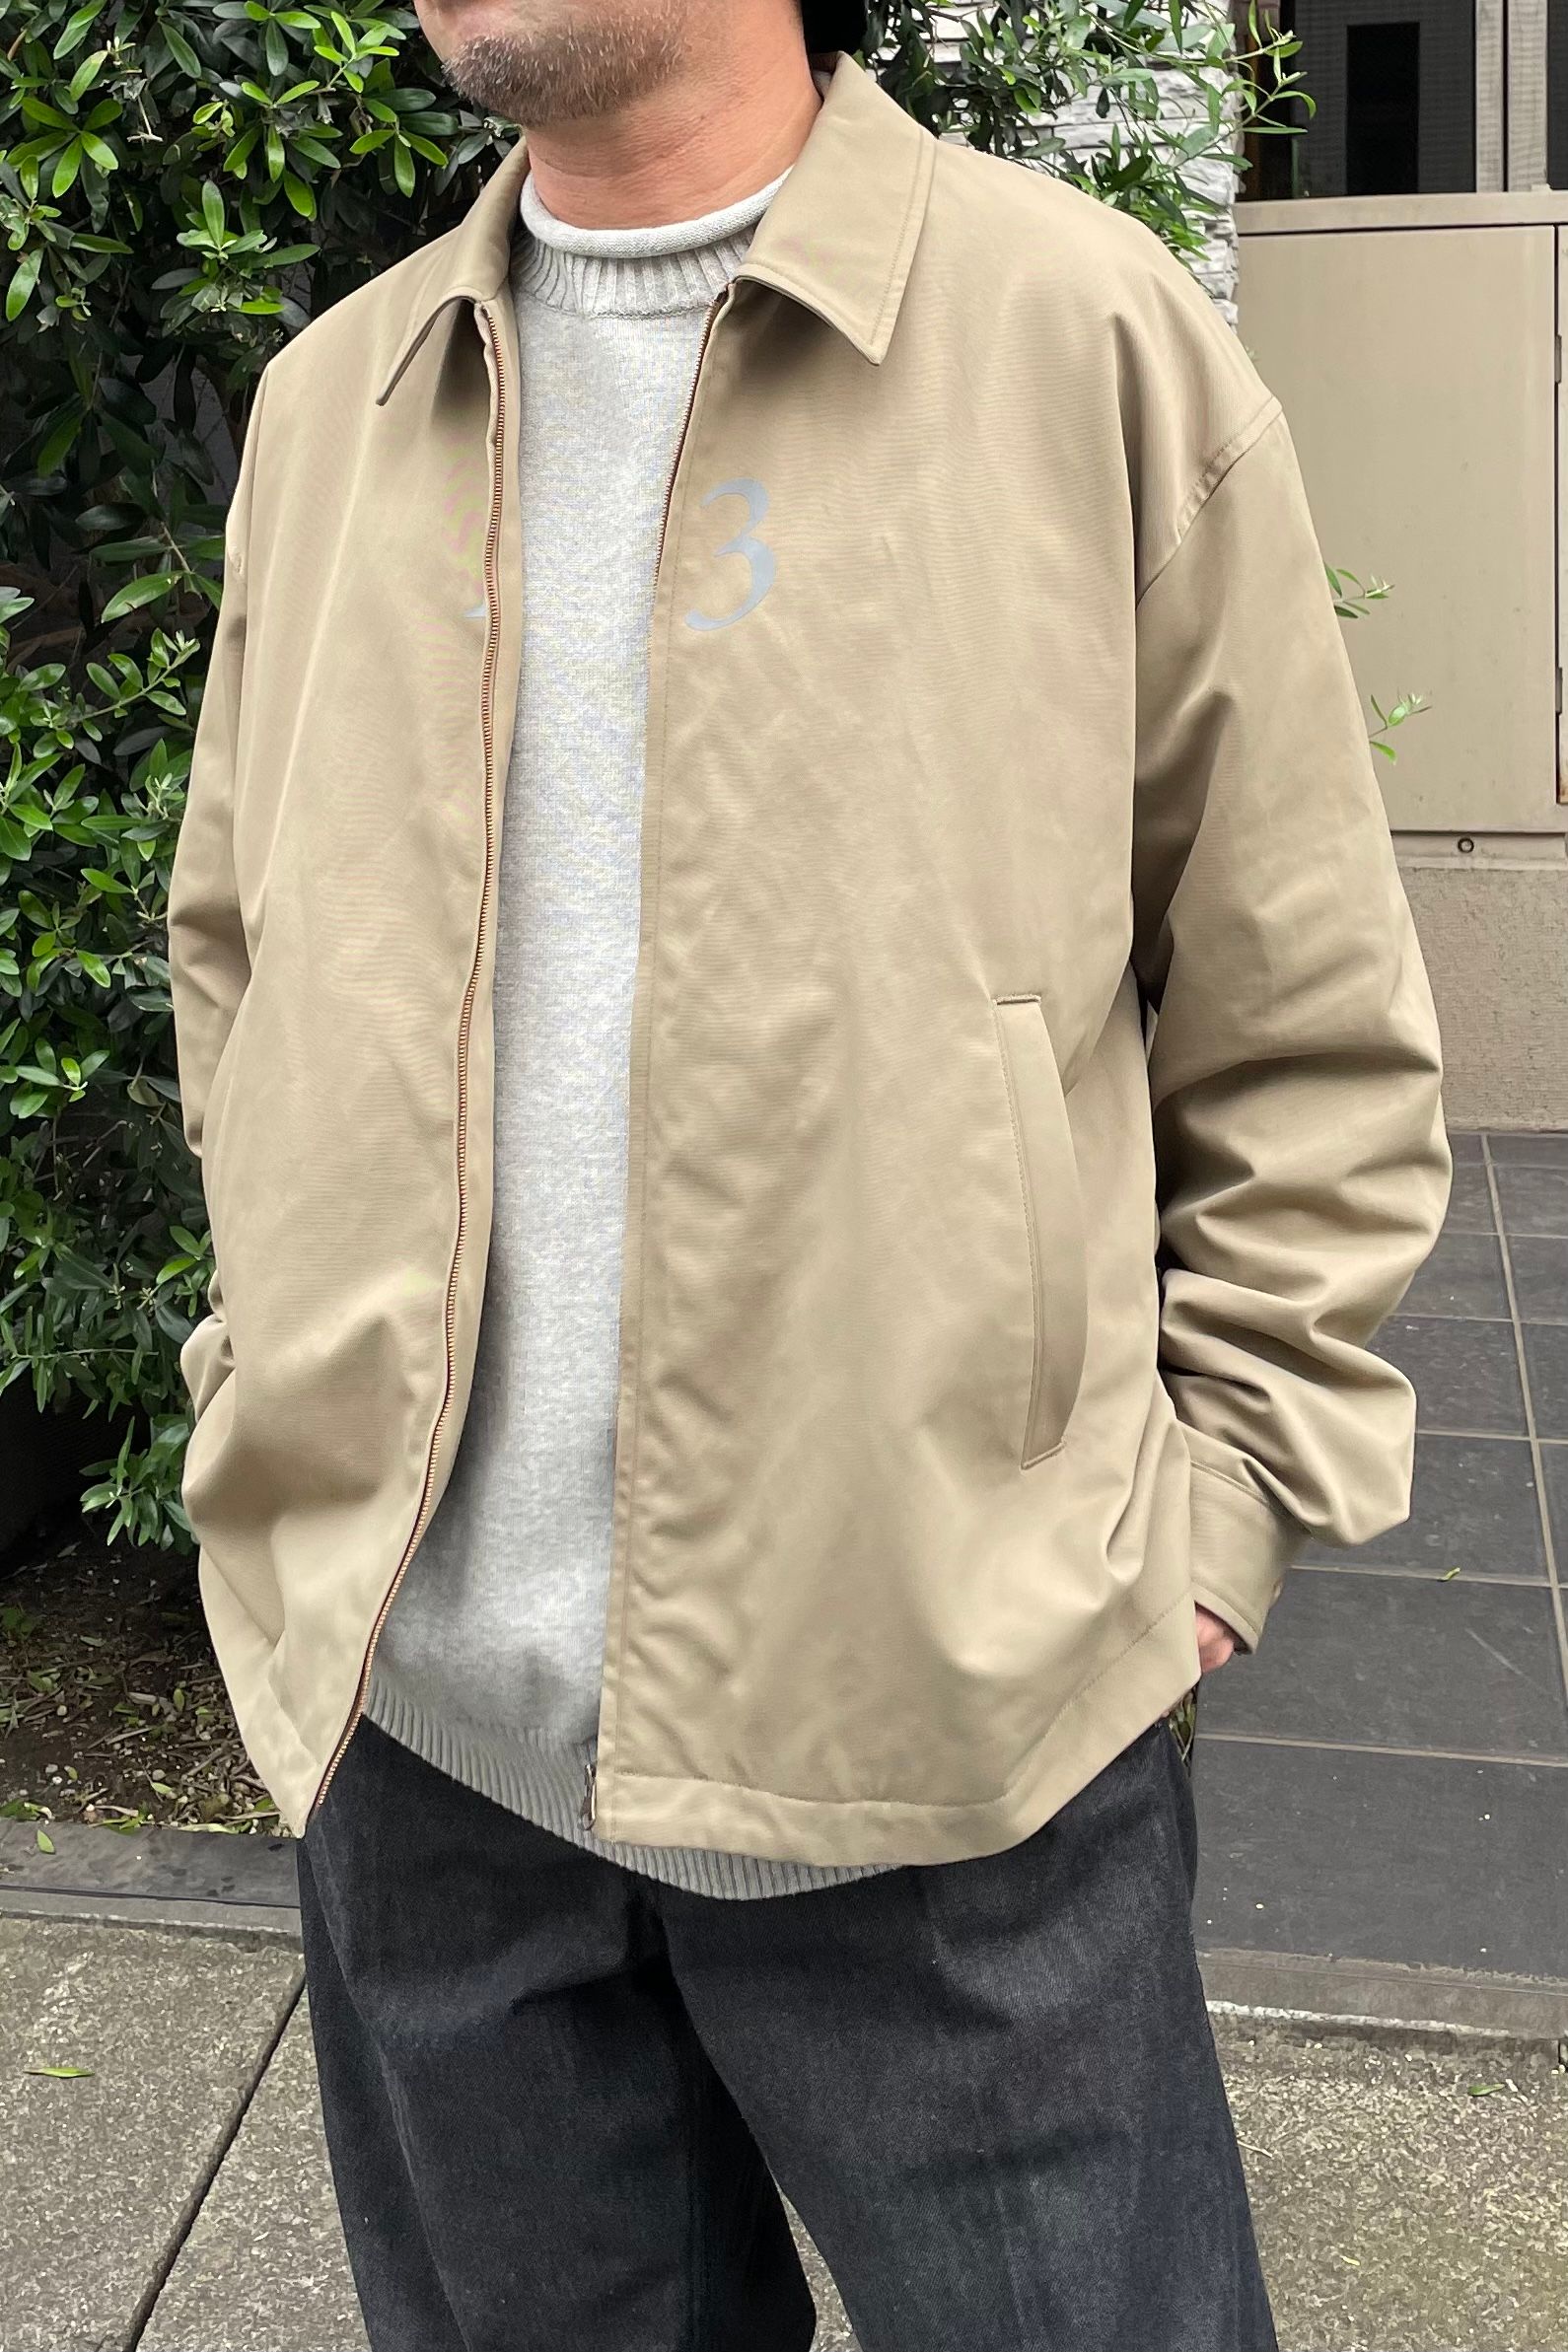 WEWILL - NUMBERED ZIP-UP JACKET -beige- 23aw | asterisk